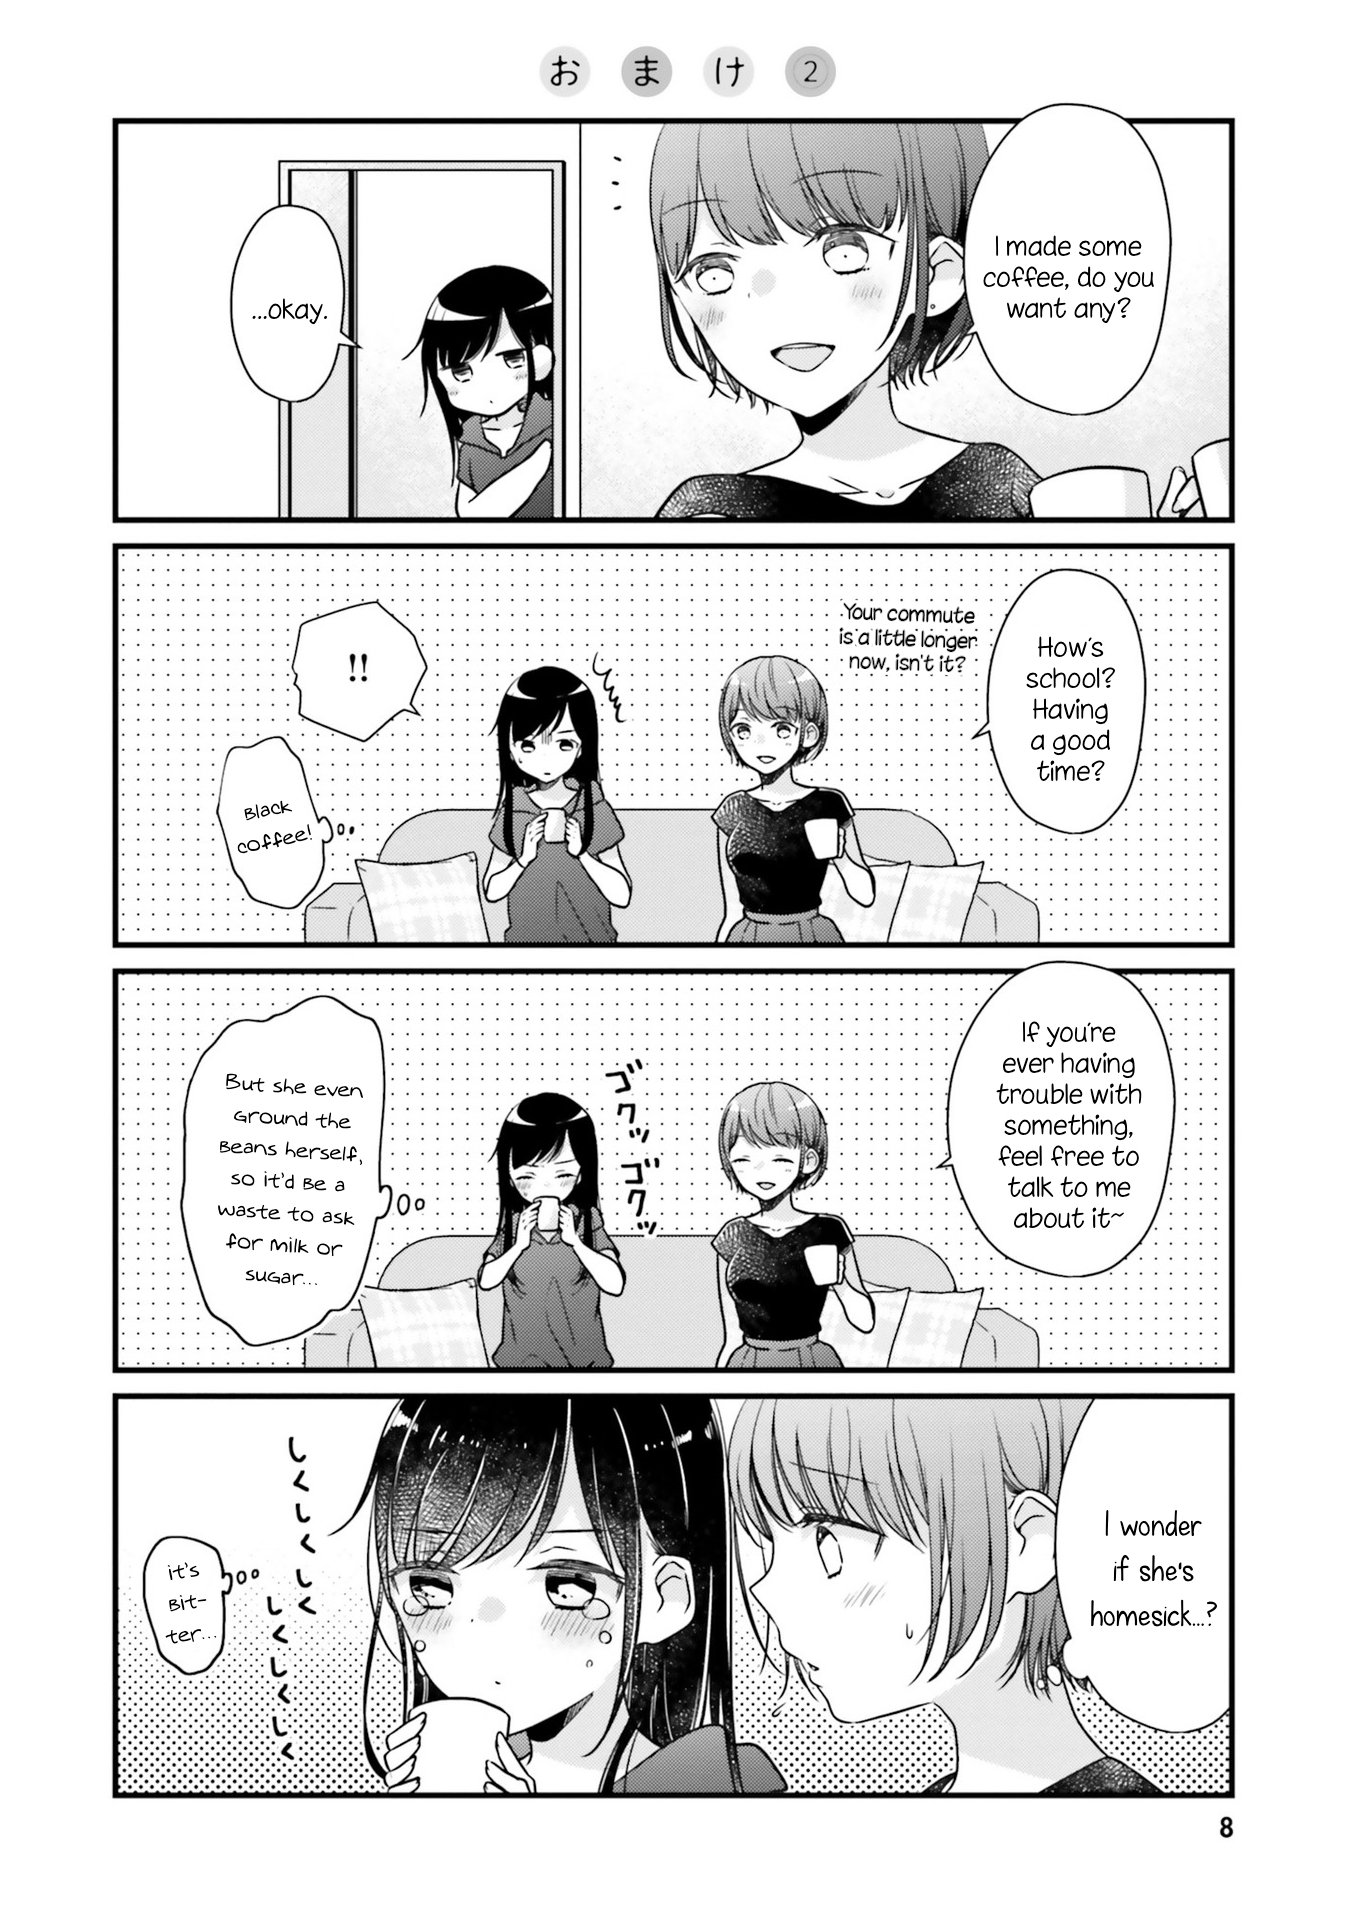 It's Painful That I Have No Idea What High School Girls Are Thinking Of These Days - chapter 7.5 - #2